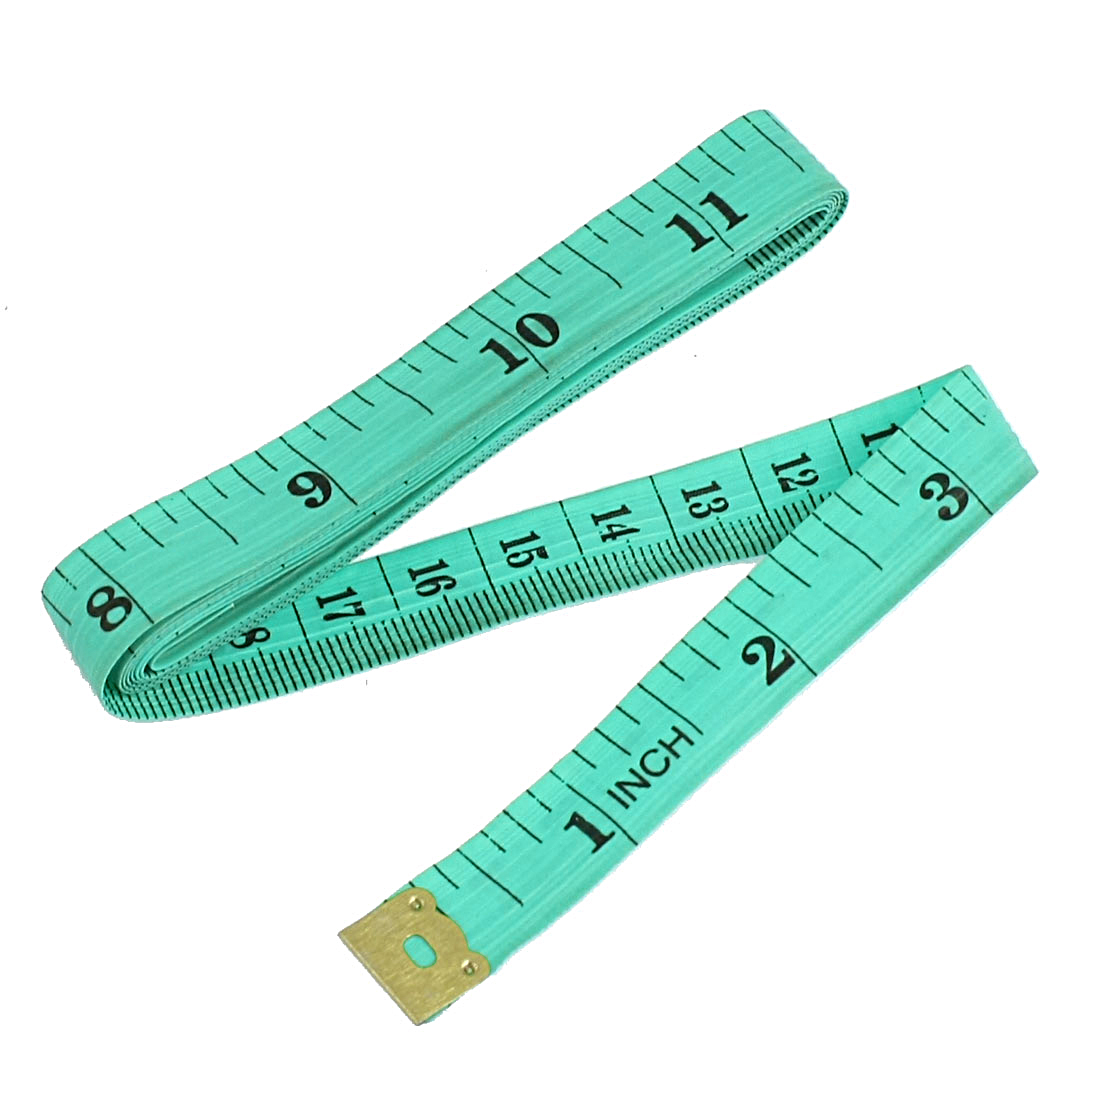 Unique Bargains 60 inch inch/Metric Tape Measure Tailor Sewing Cloth Ruler Green - image 1 of 1